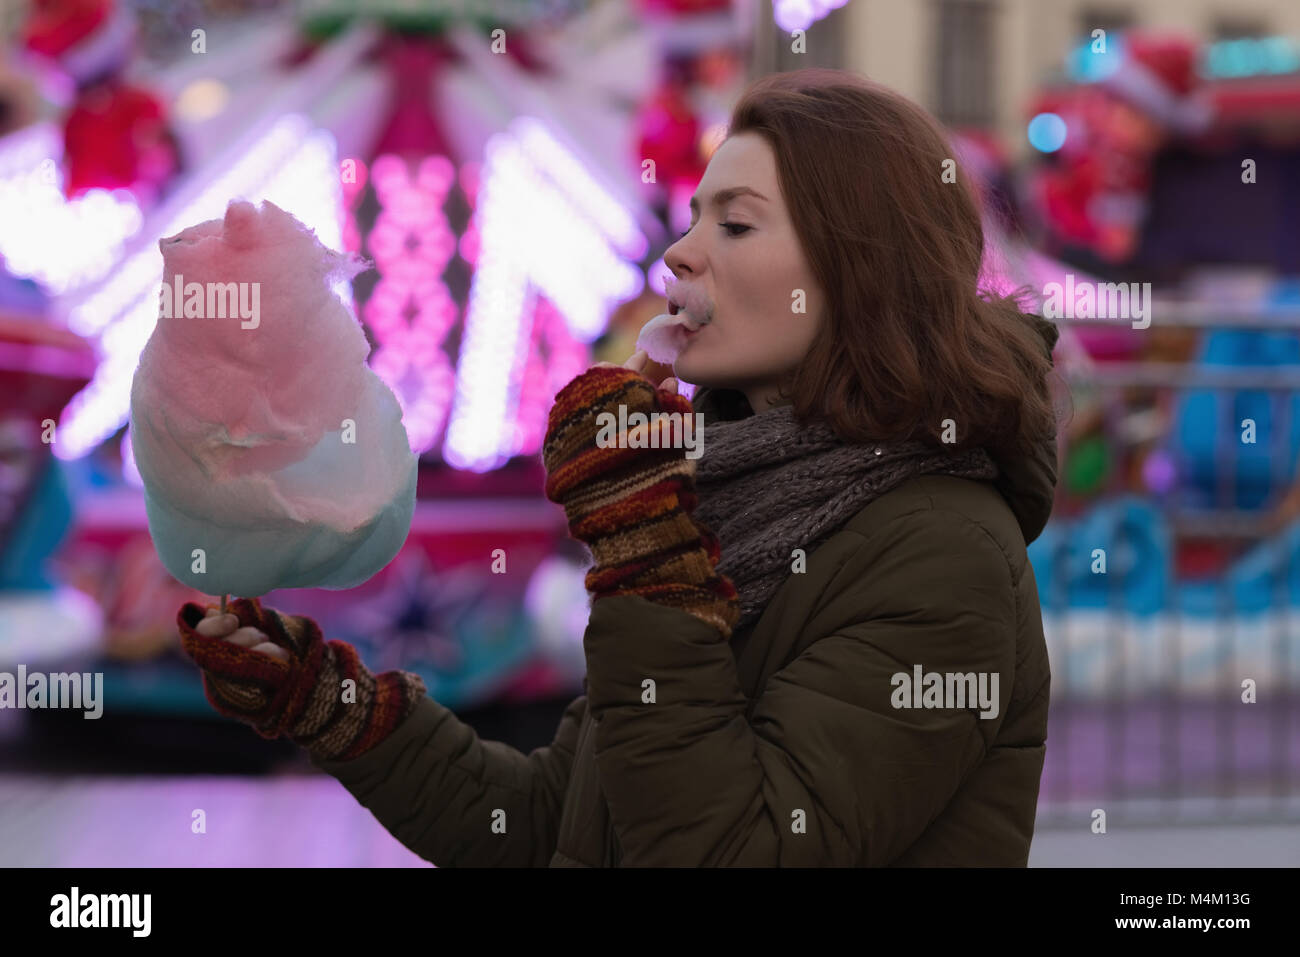 Woman in winter clothing having candy floss Stock Photo